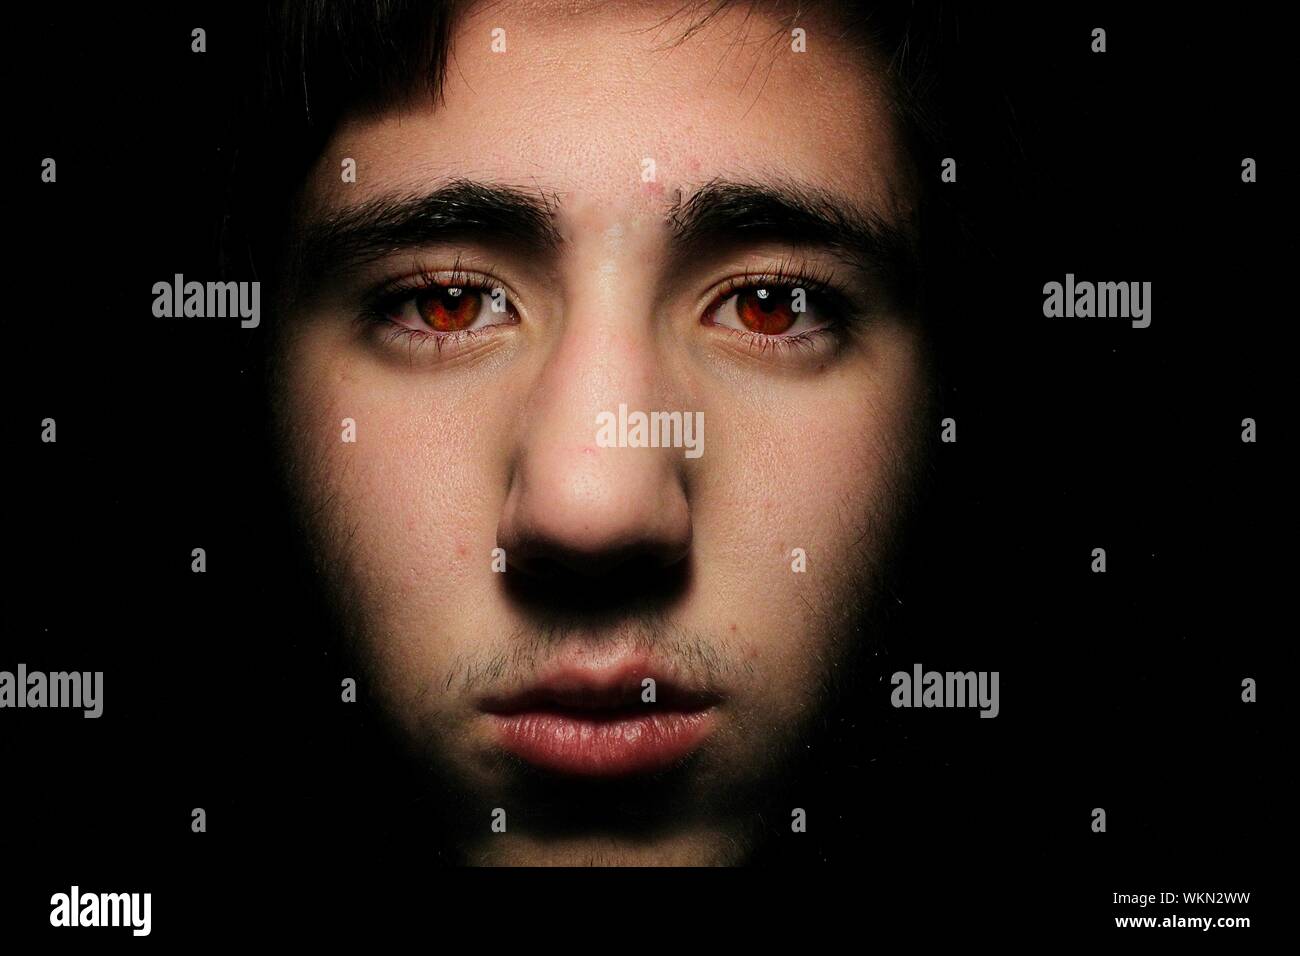 Close-up Portrait Of Man With Red Eyes Against Black Background Stock Photo